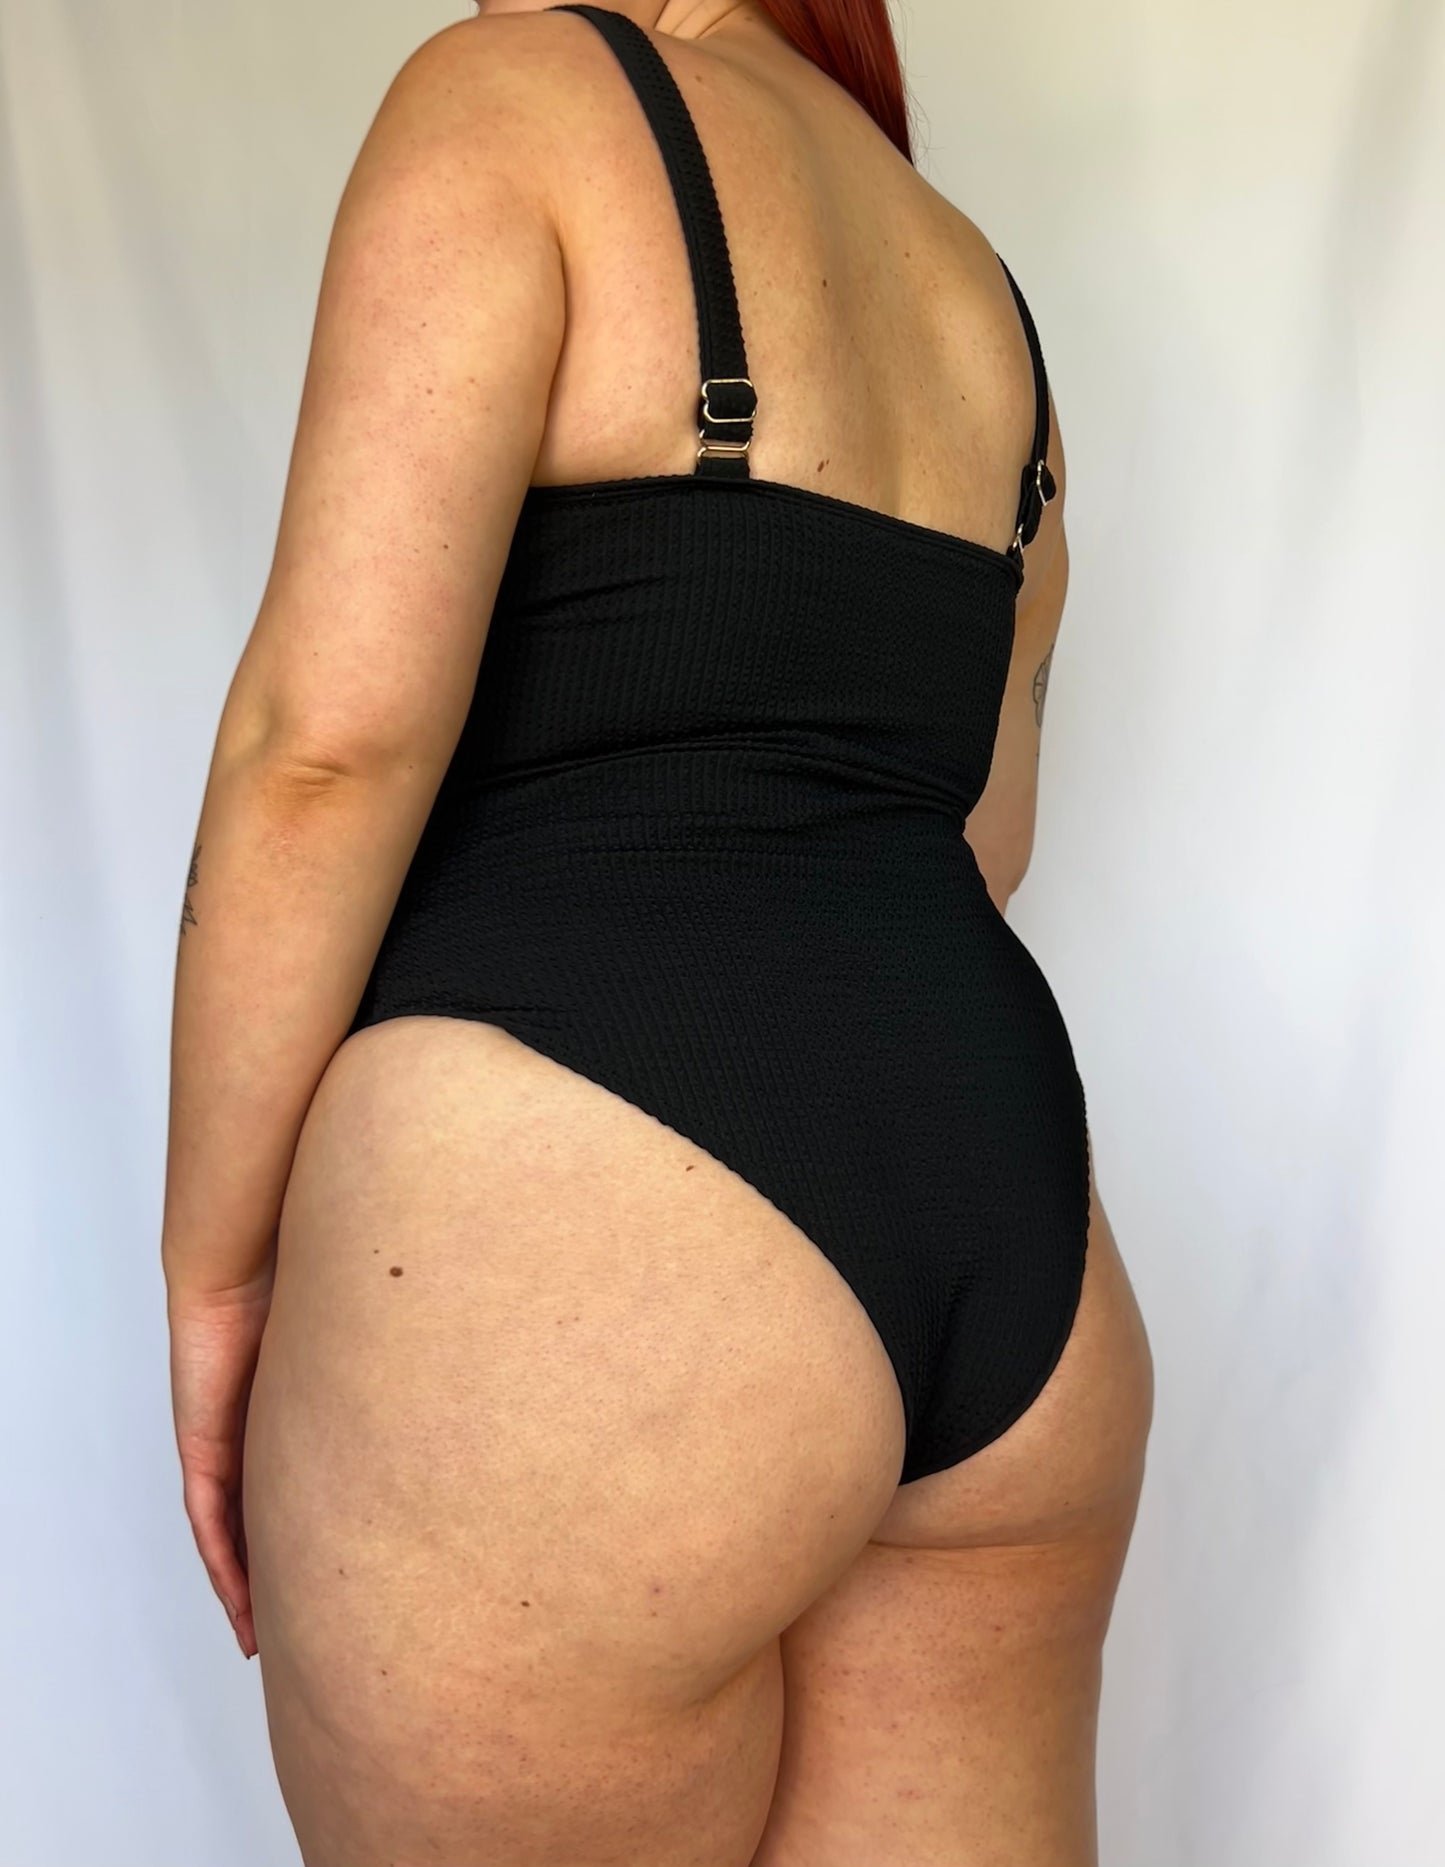 Close up of the black one piece from the back. Swimsuit is the milkmaid style tie front crinkle fabric one piece. Black one piece is high cut and cheeky. 